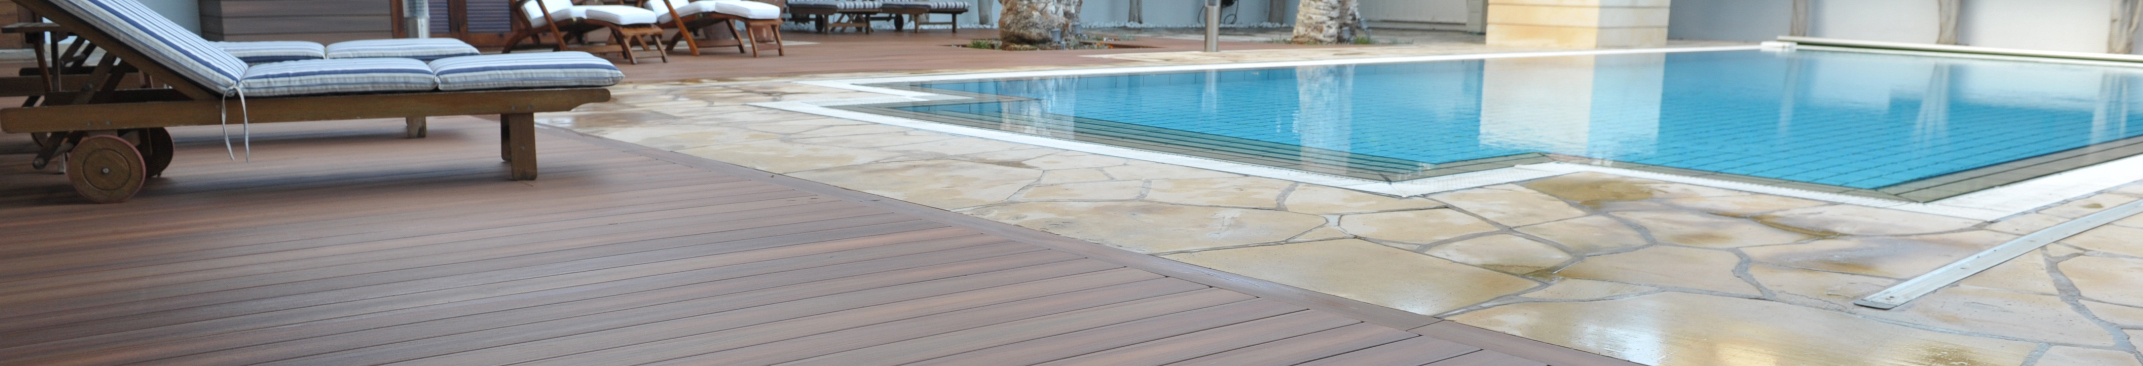 Decking Ideas and Latest Top Trends